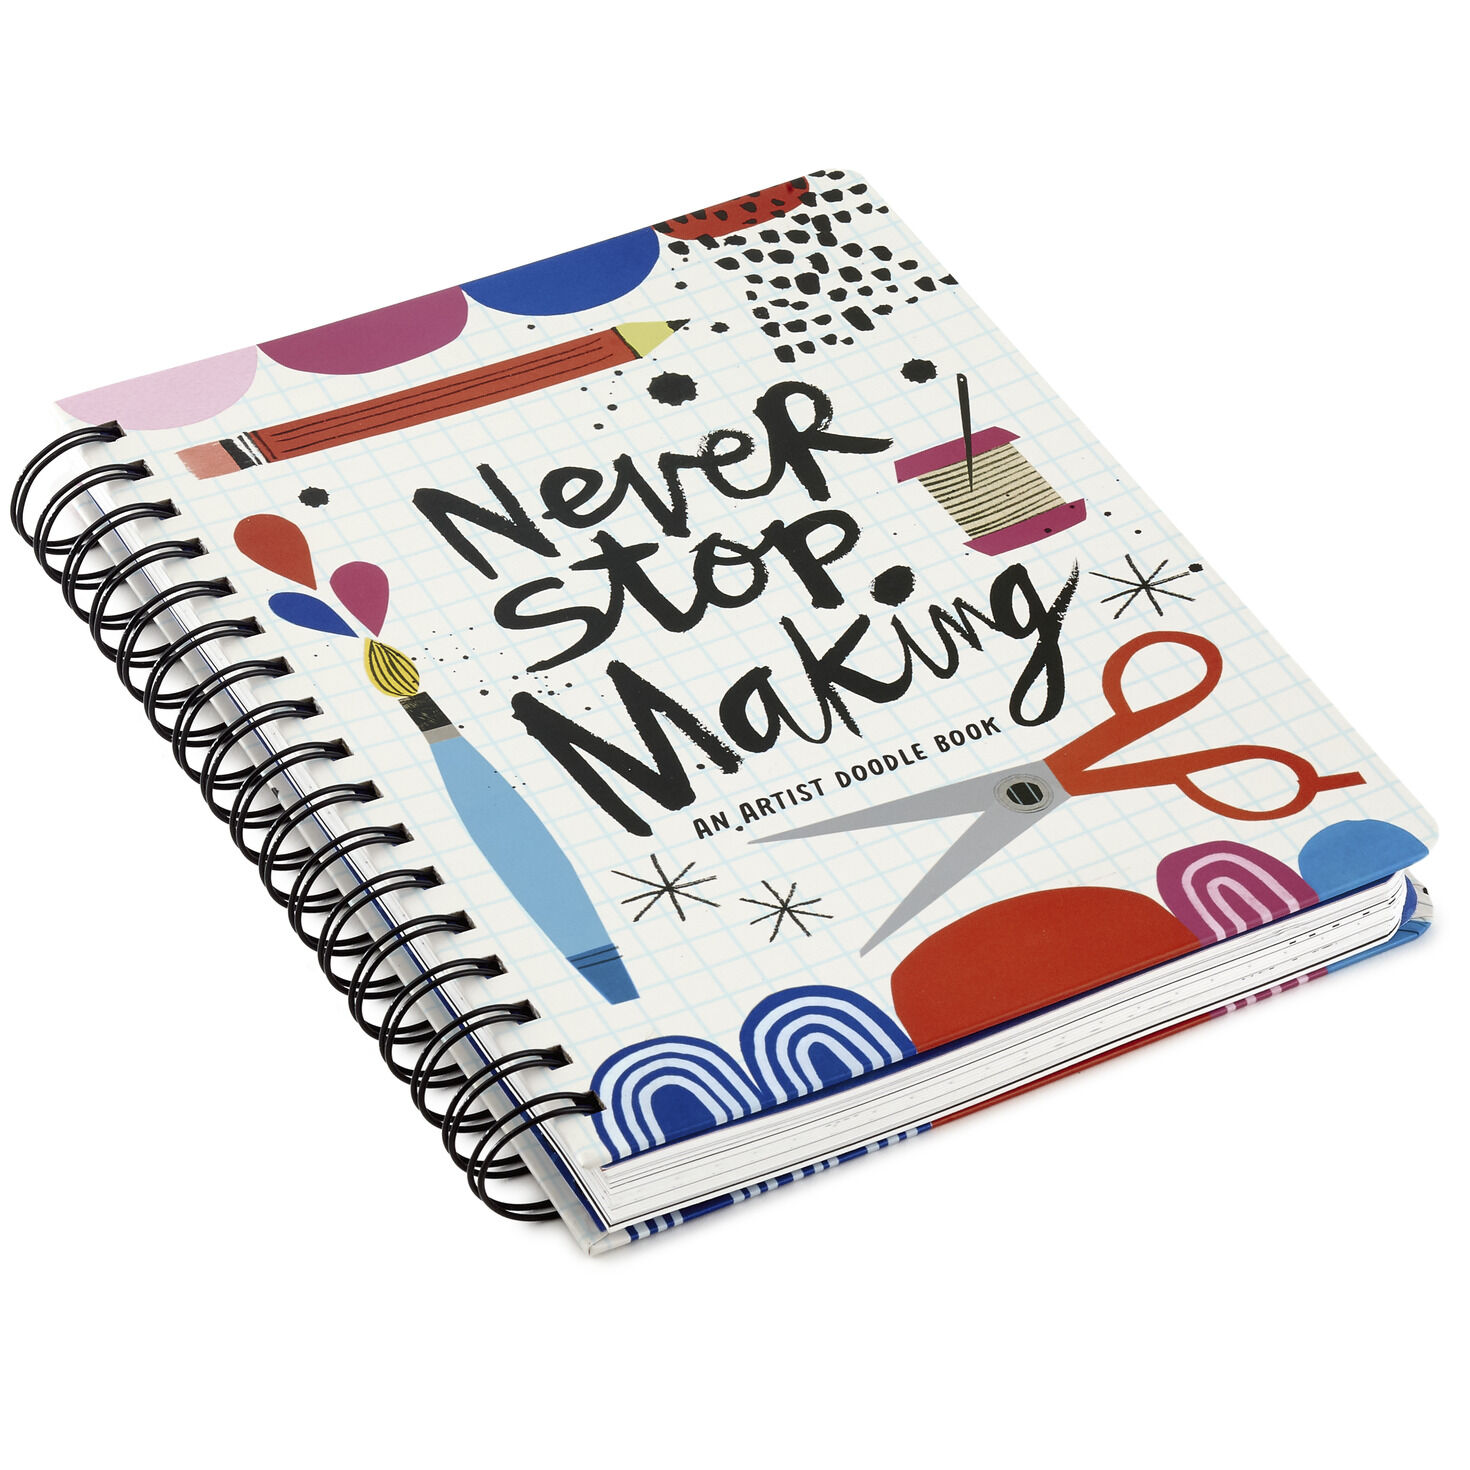 Four Wonder Notebooks: Draw, Dream, Doodle, and Write